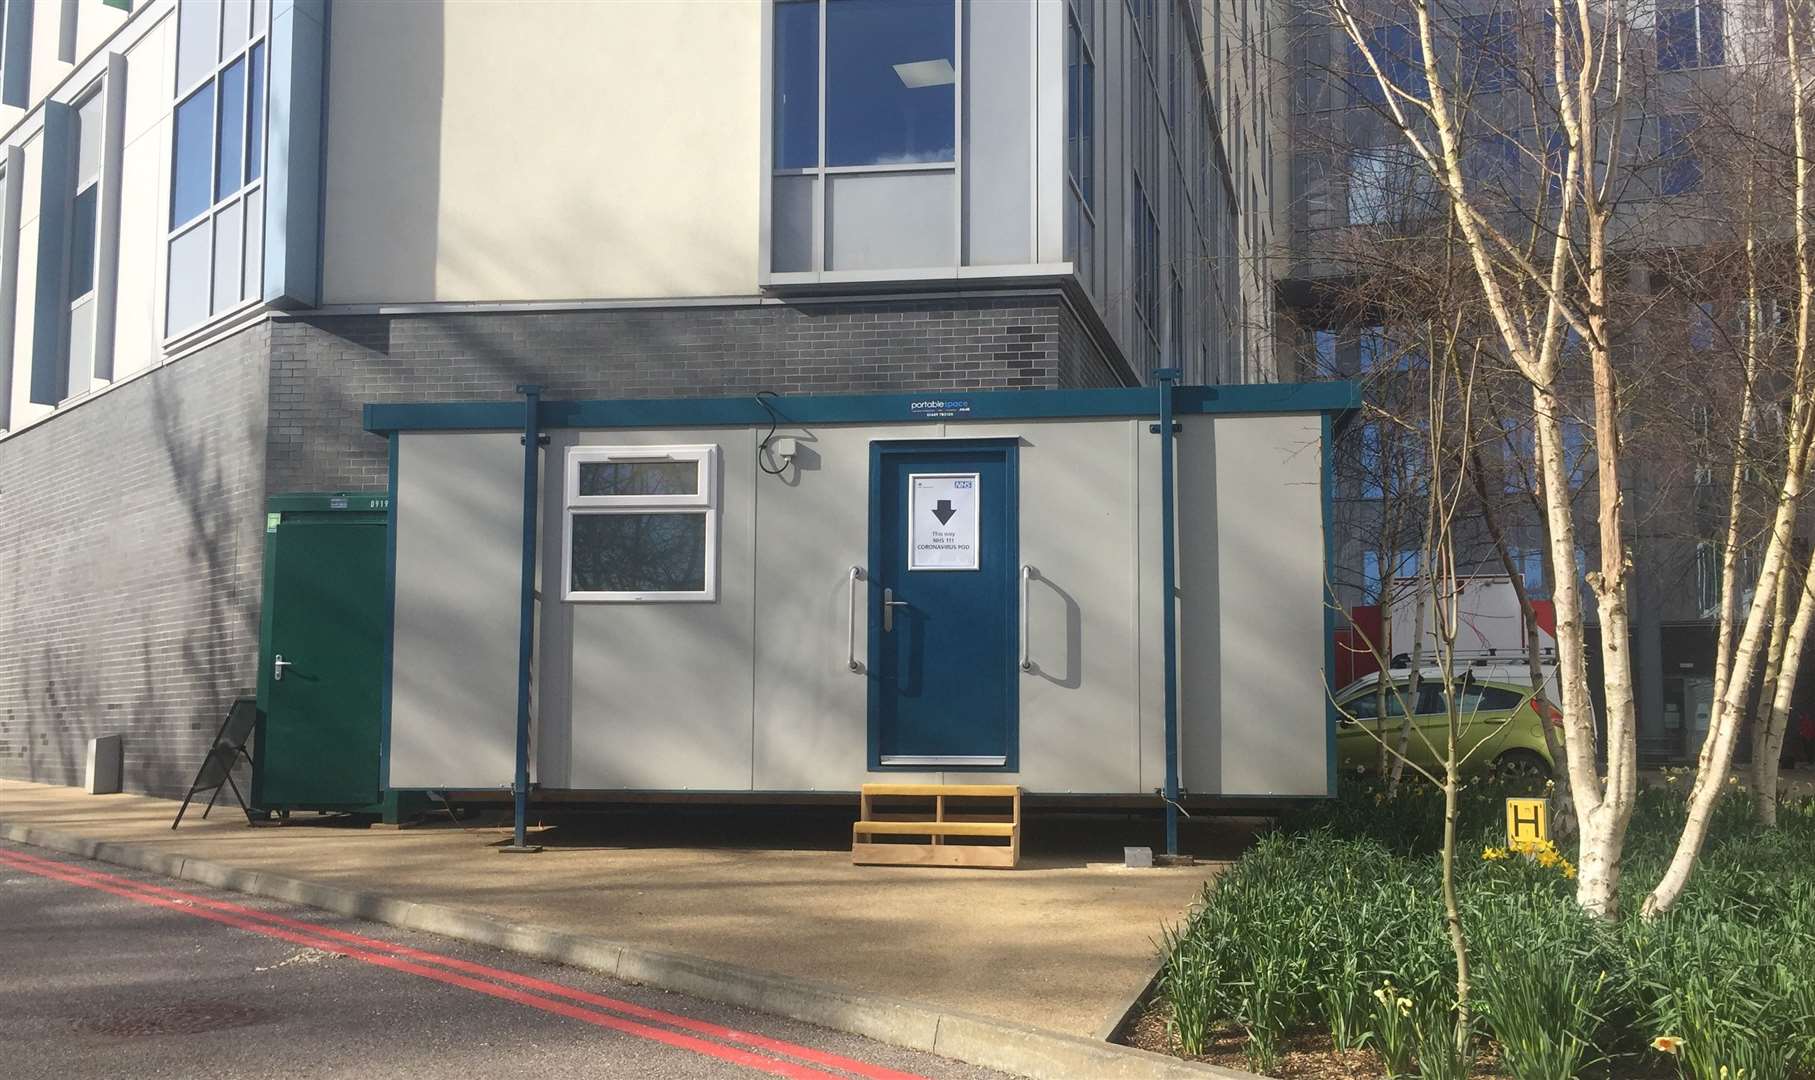 The isolation pod at Tunbridge Wells Hospital is accessed via the deliveries entrance